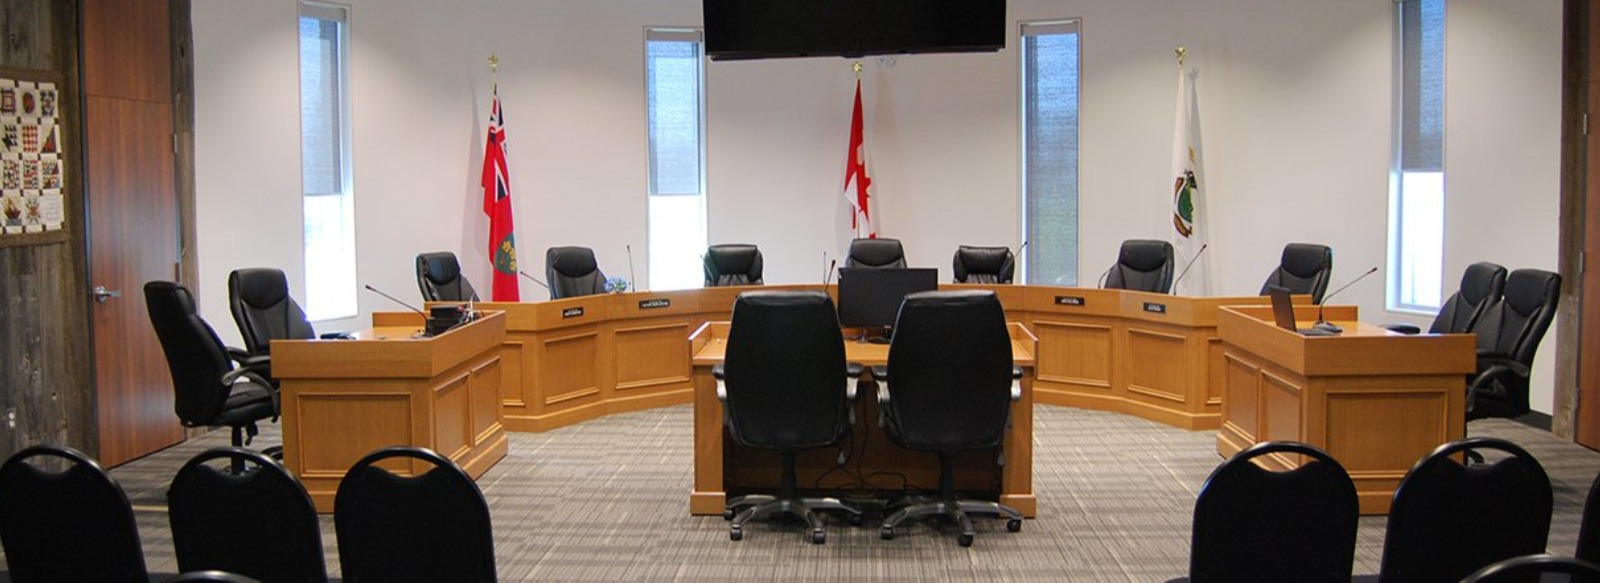 Interior image of council chambers